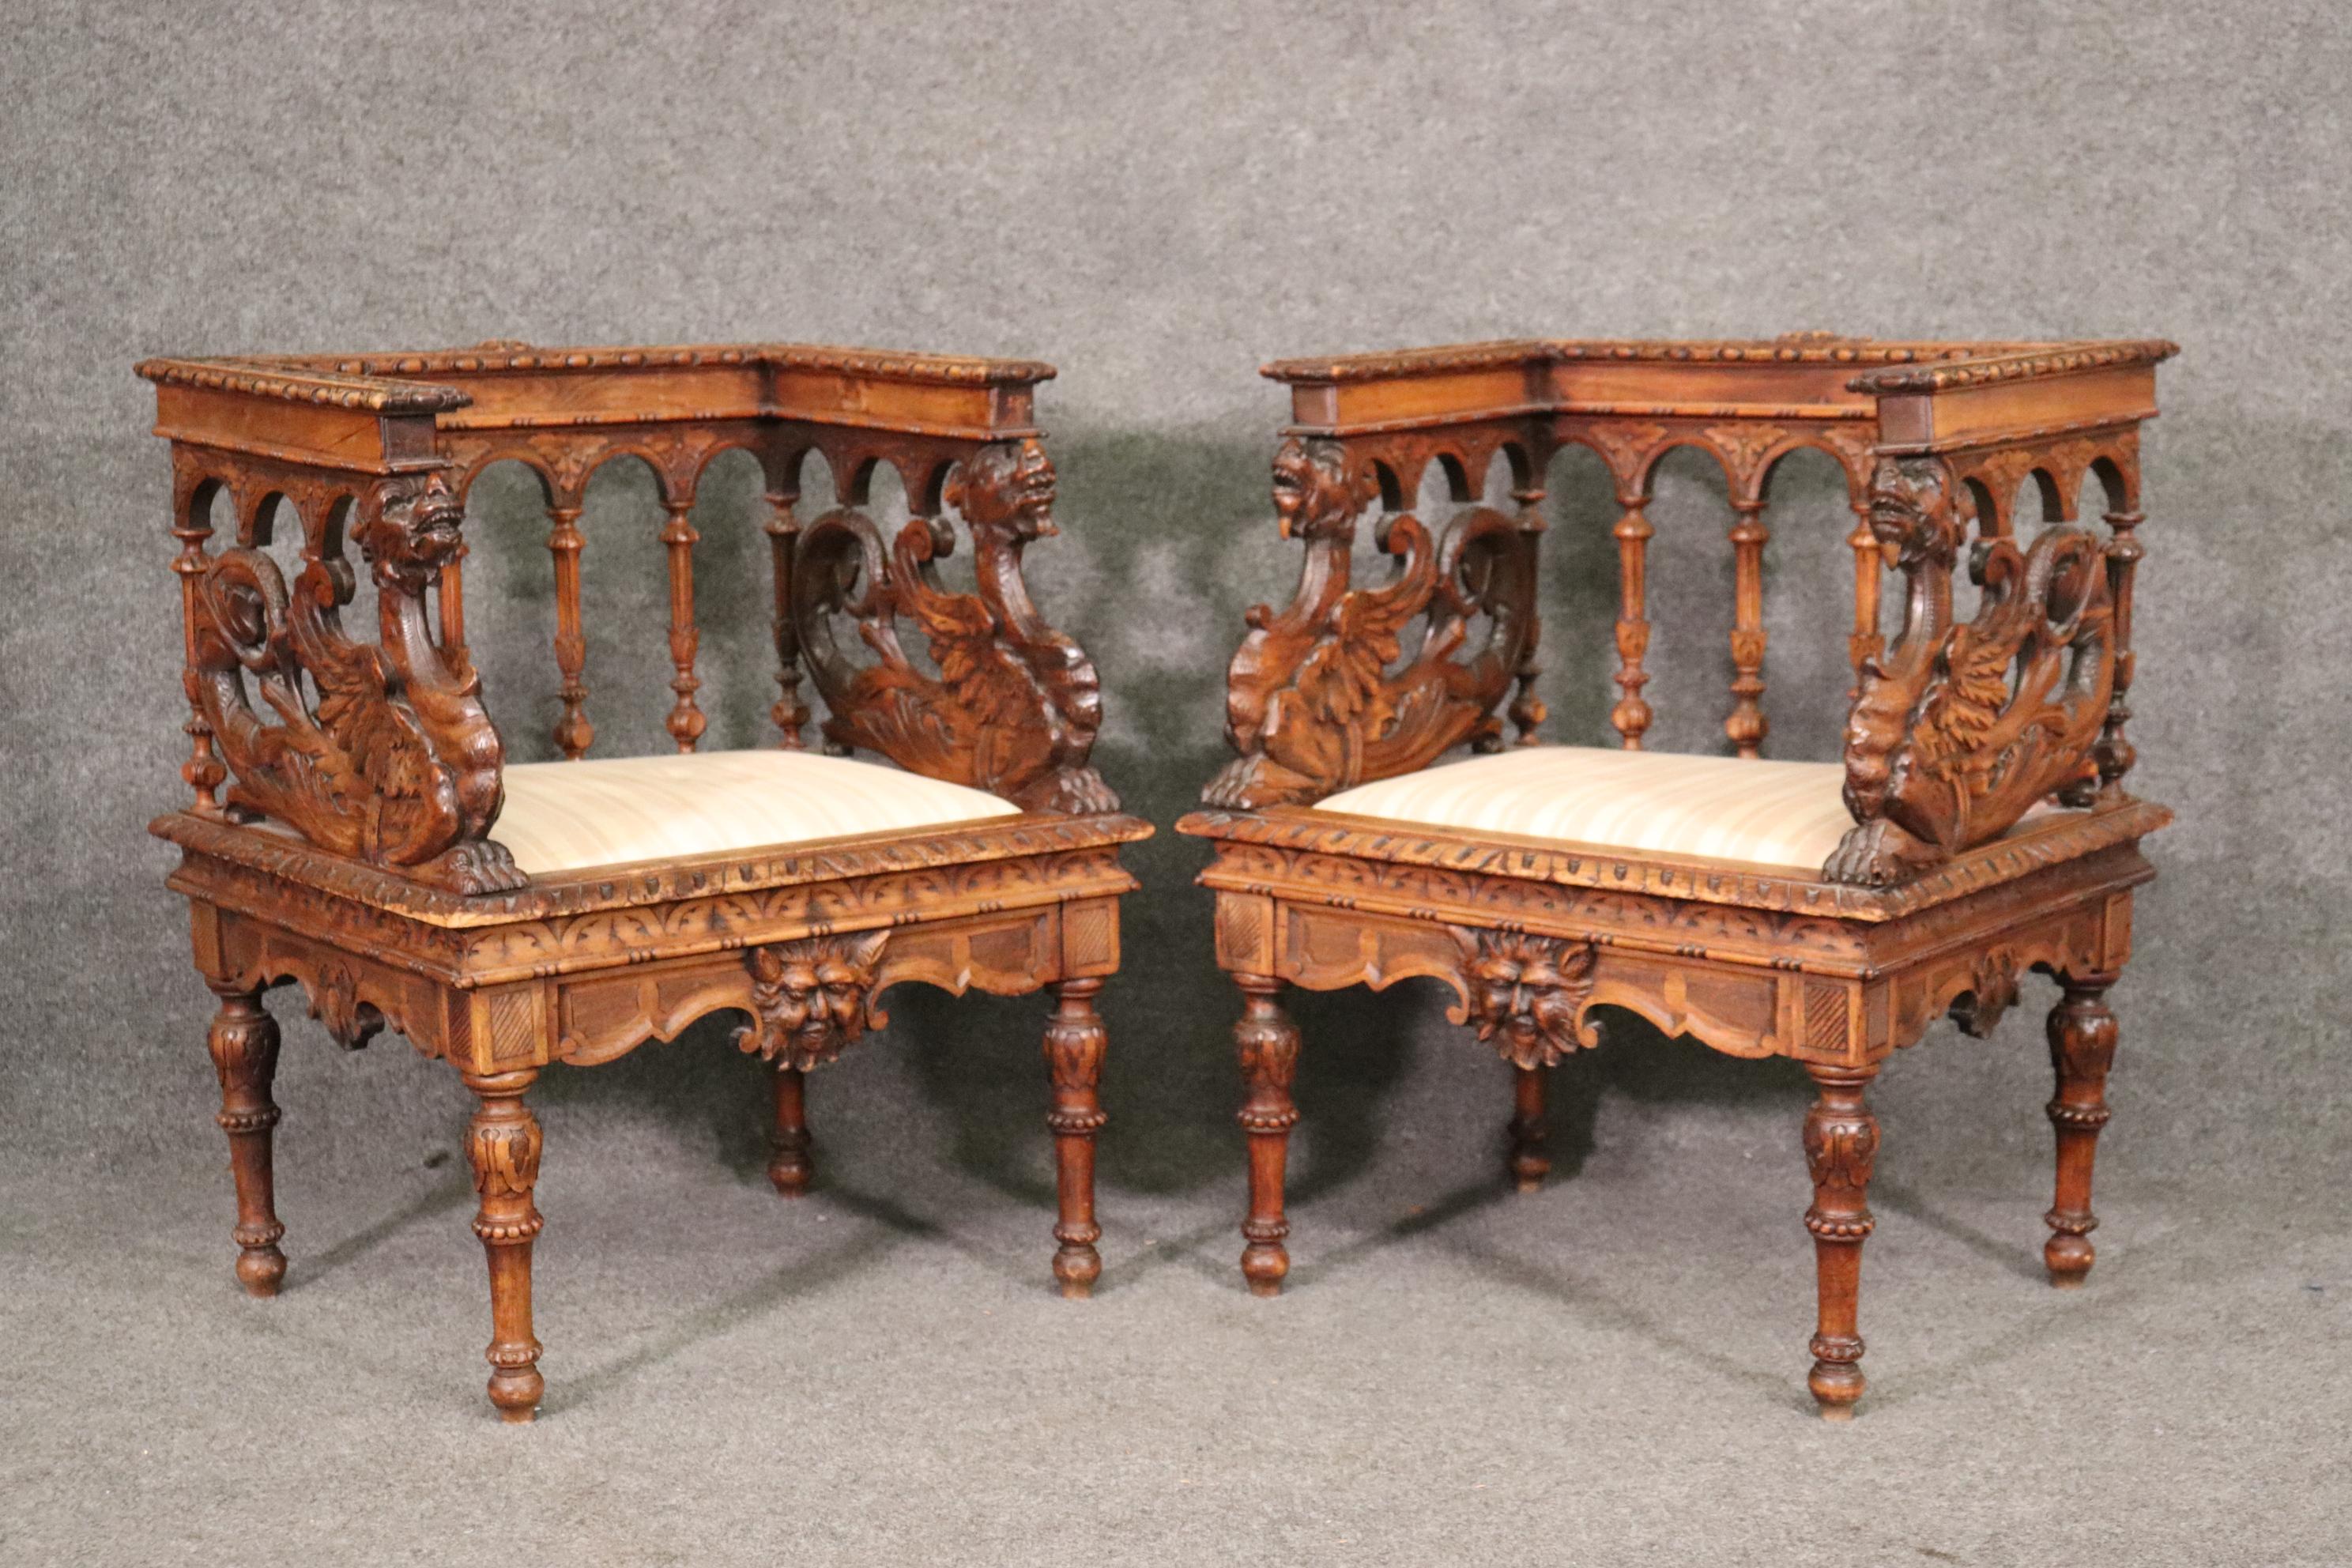 This is spectacular pair of carved walnut carved chairs with Griffins and the face of the Northwind. The carving is absolutely breathtaking and couldn't be done better which is why we attribute them to RJ Horner one of the best American makers that